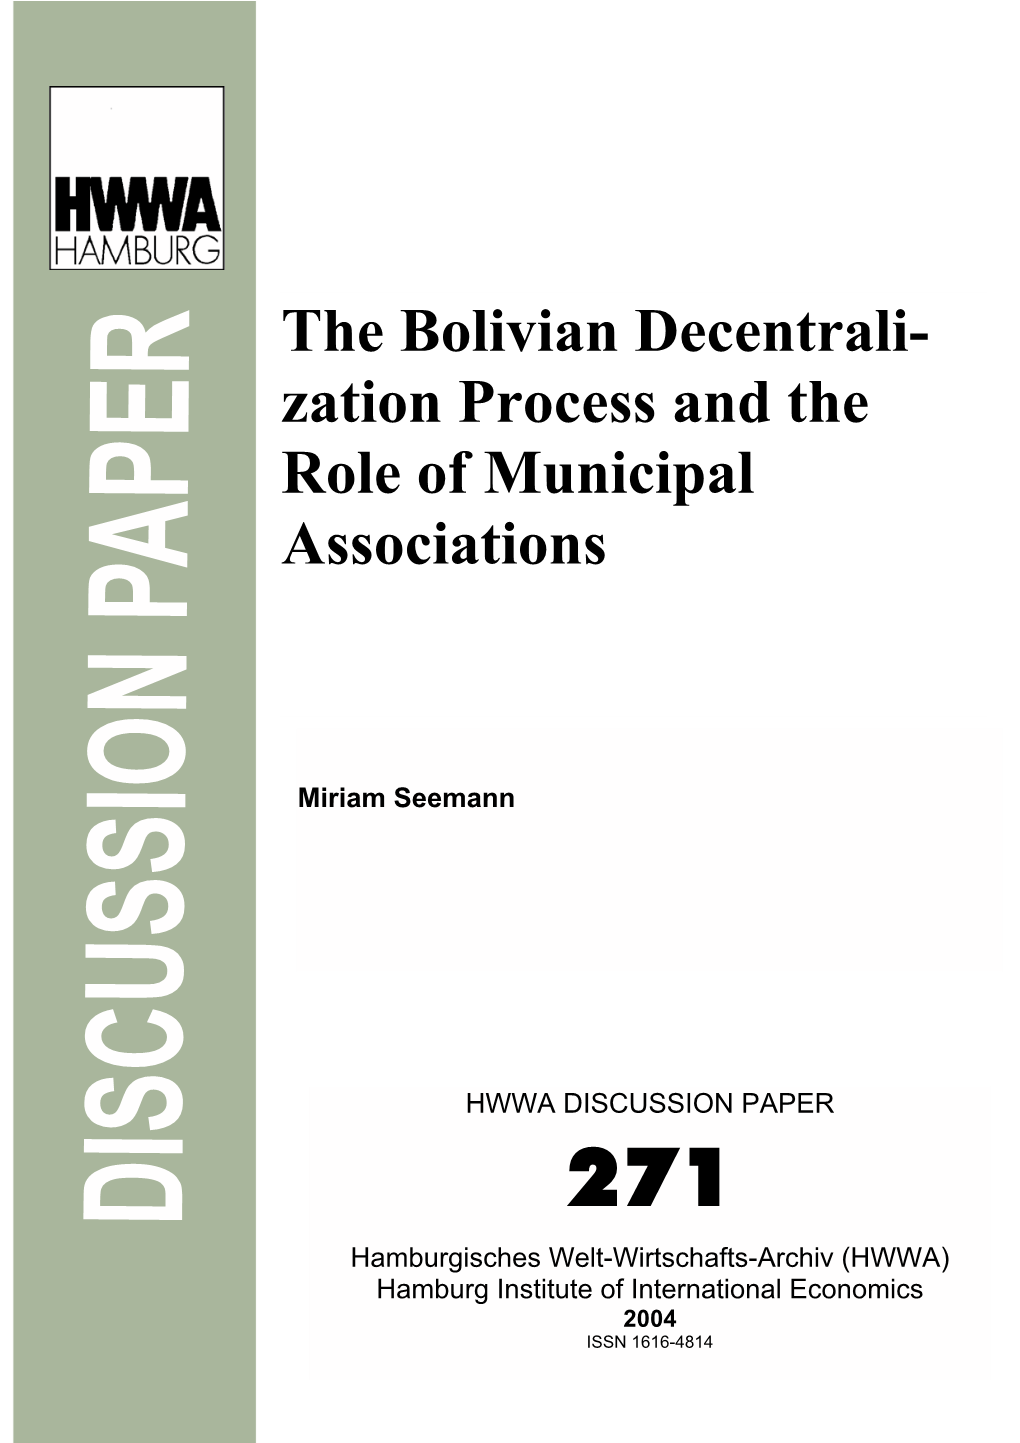 The Bolivian Decentralization Process and the Role of Municipal Associations